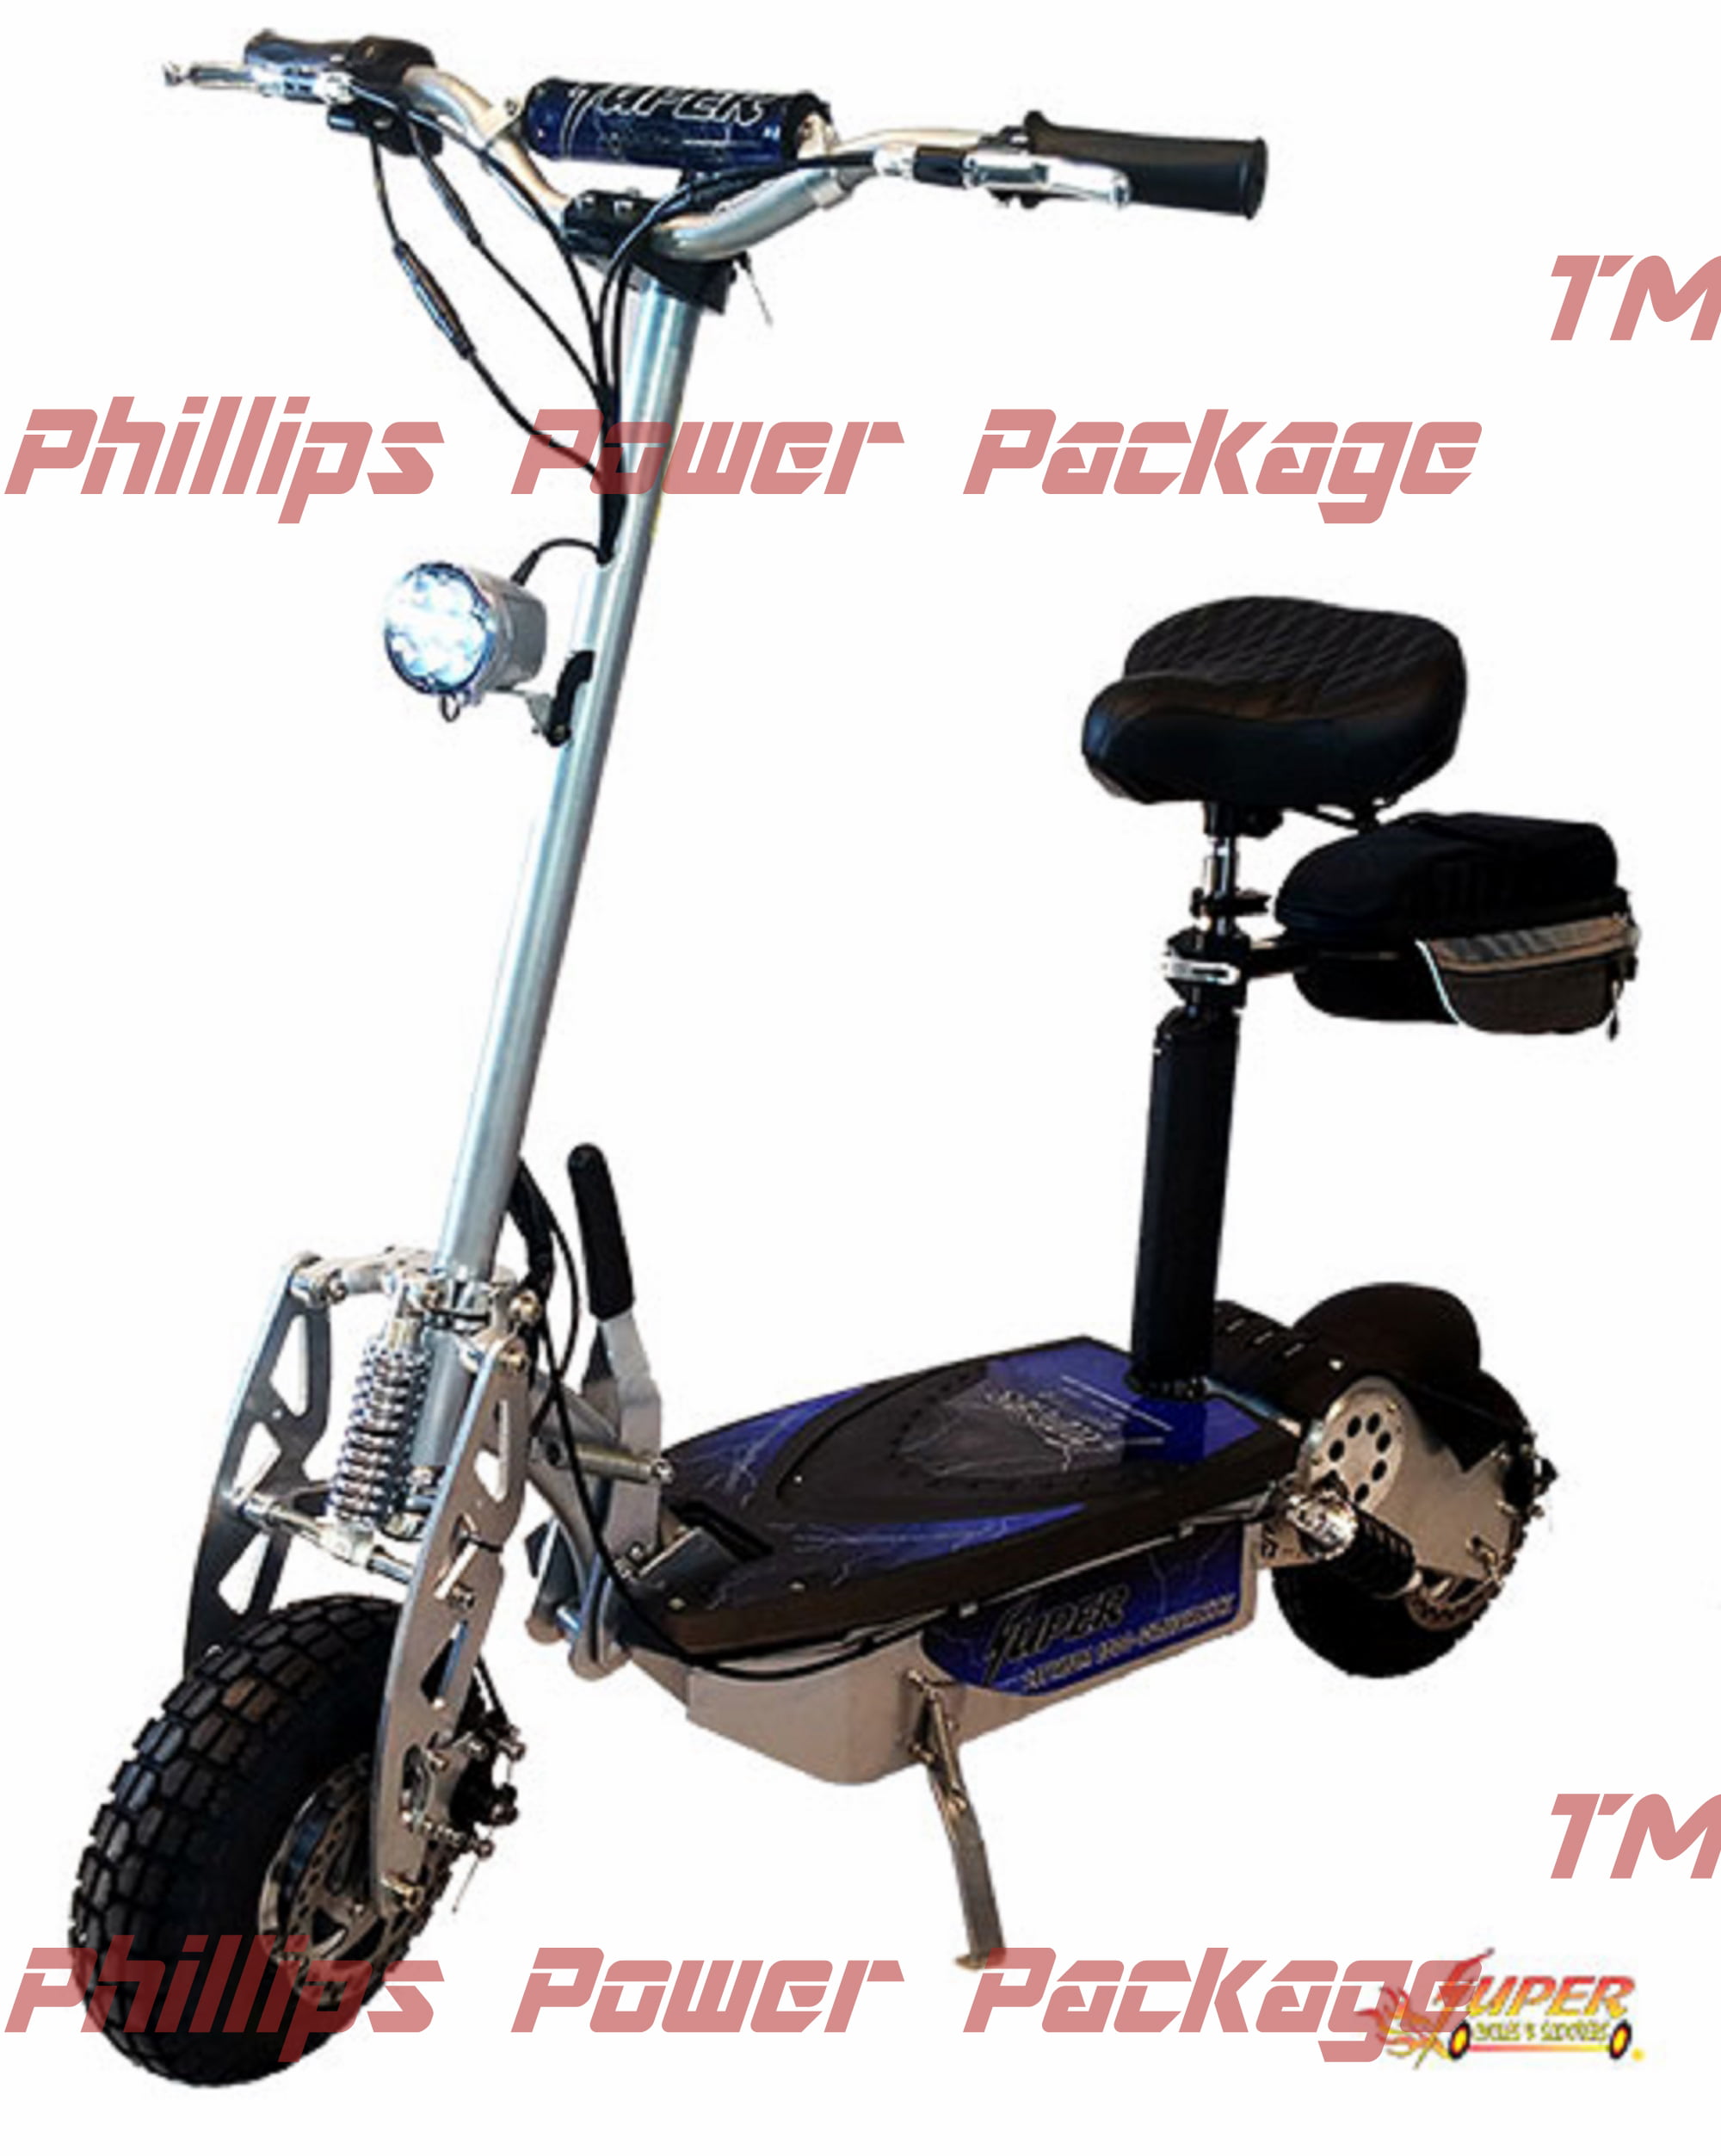 Super Cycles & Scooters - Super Lithium 1300 Brushless - Scooter - 2-Wheel - Silver - Walmart.com